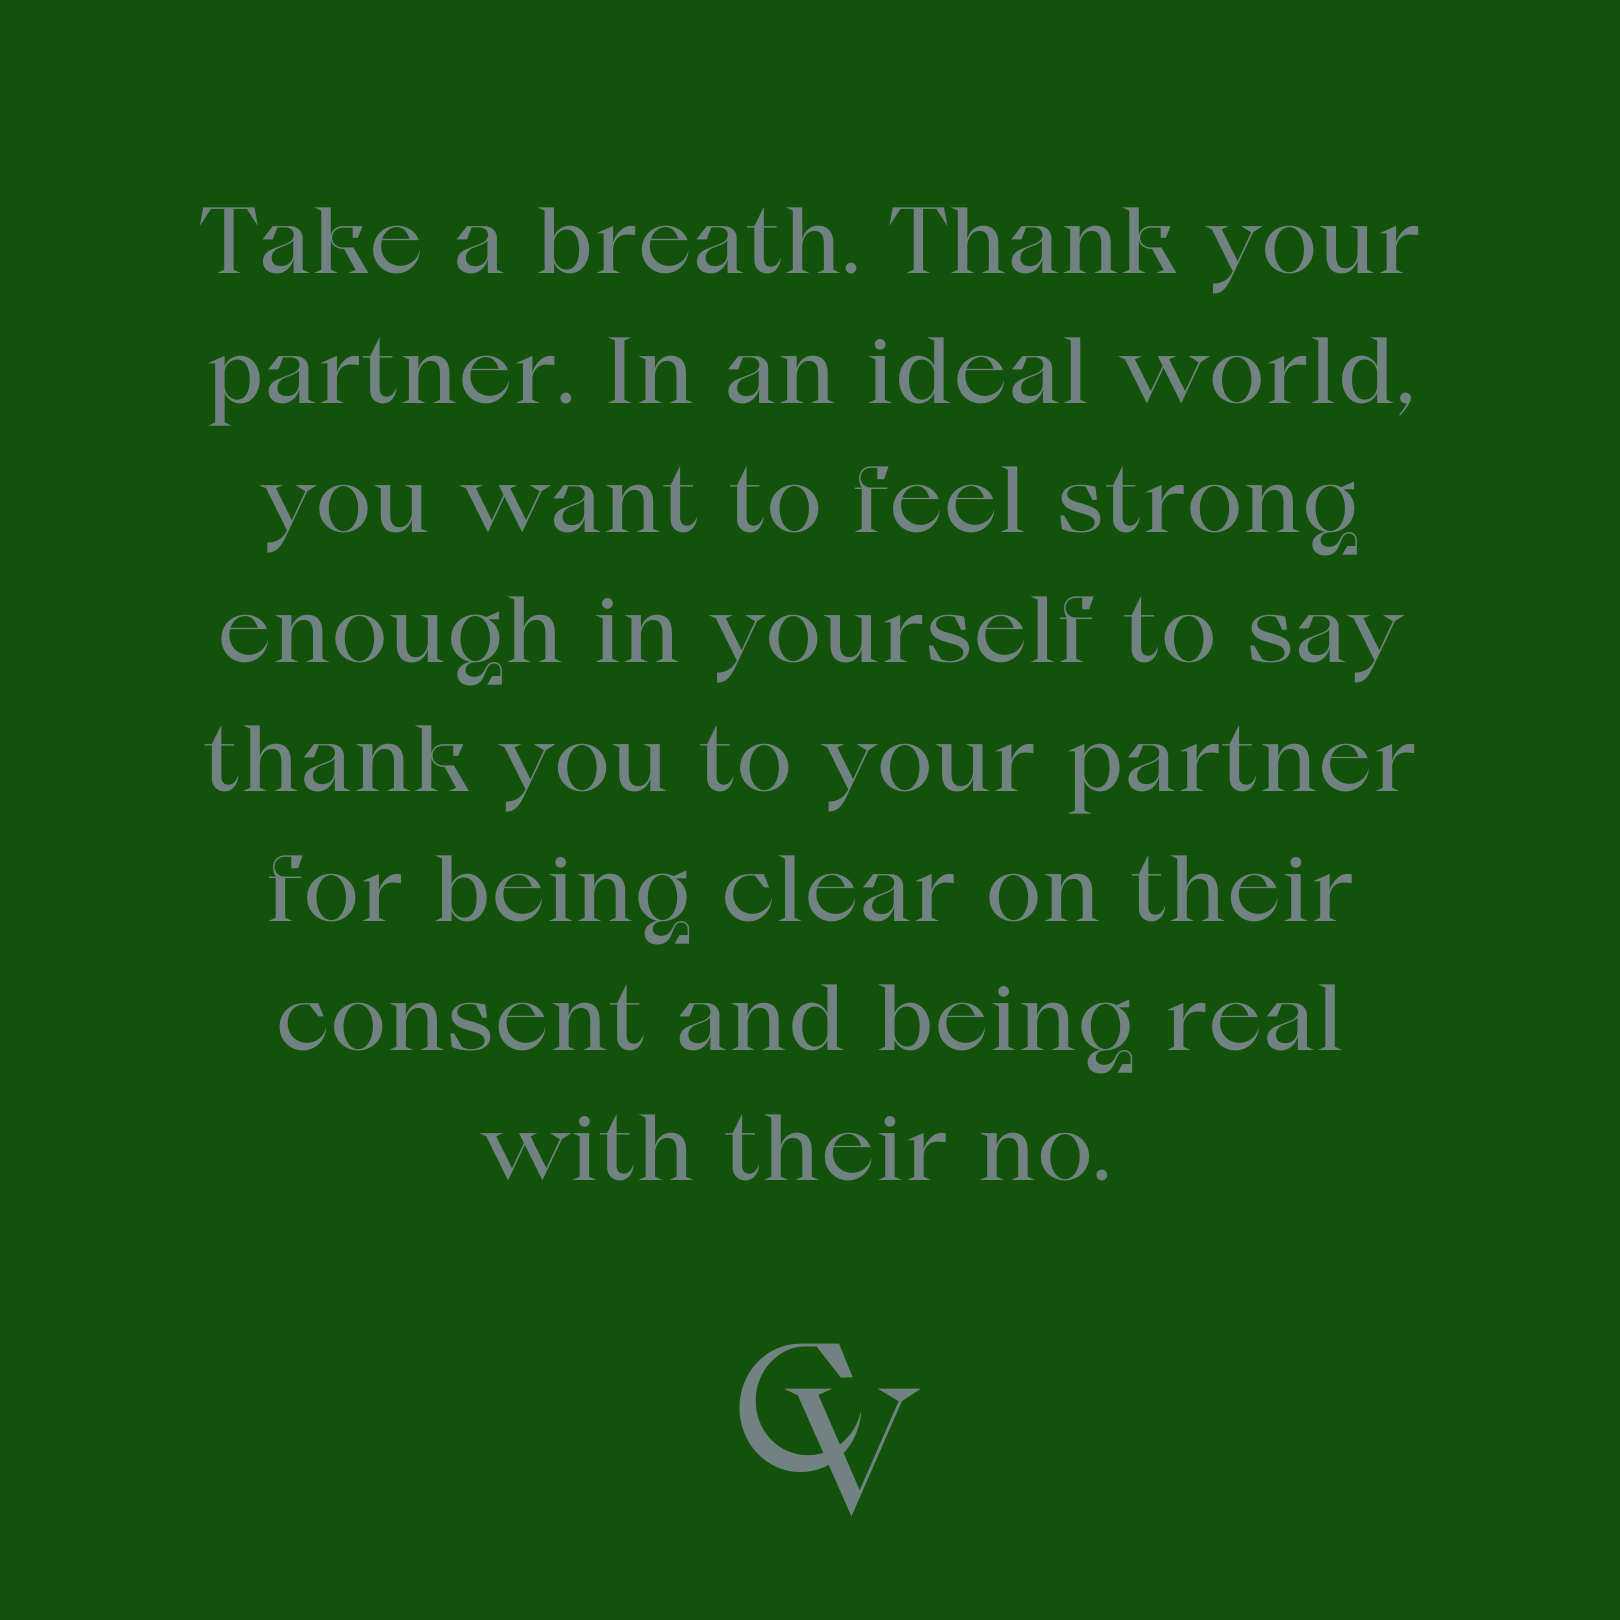 Take a breath. Thank your partner. In an ideal world, you want to feel strong enough in yourself to say thank you to your partner for being clear on their consent and being real with their no.